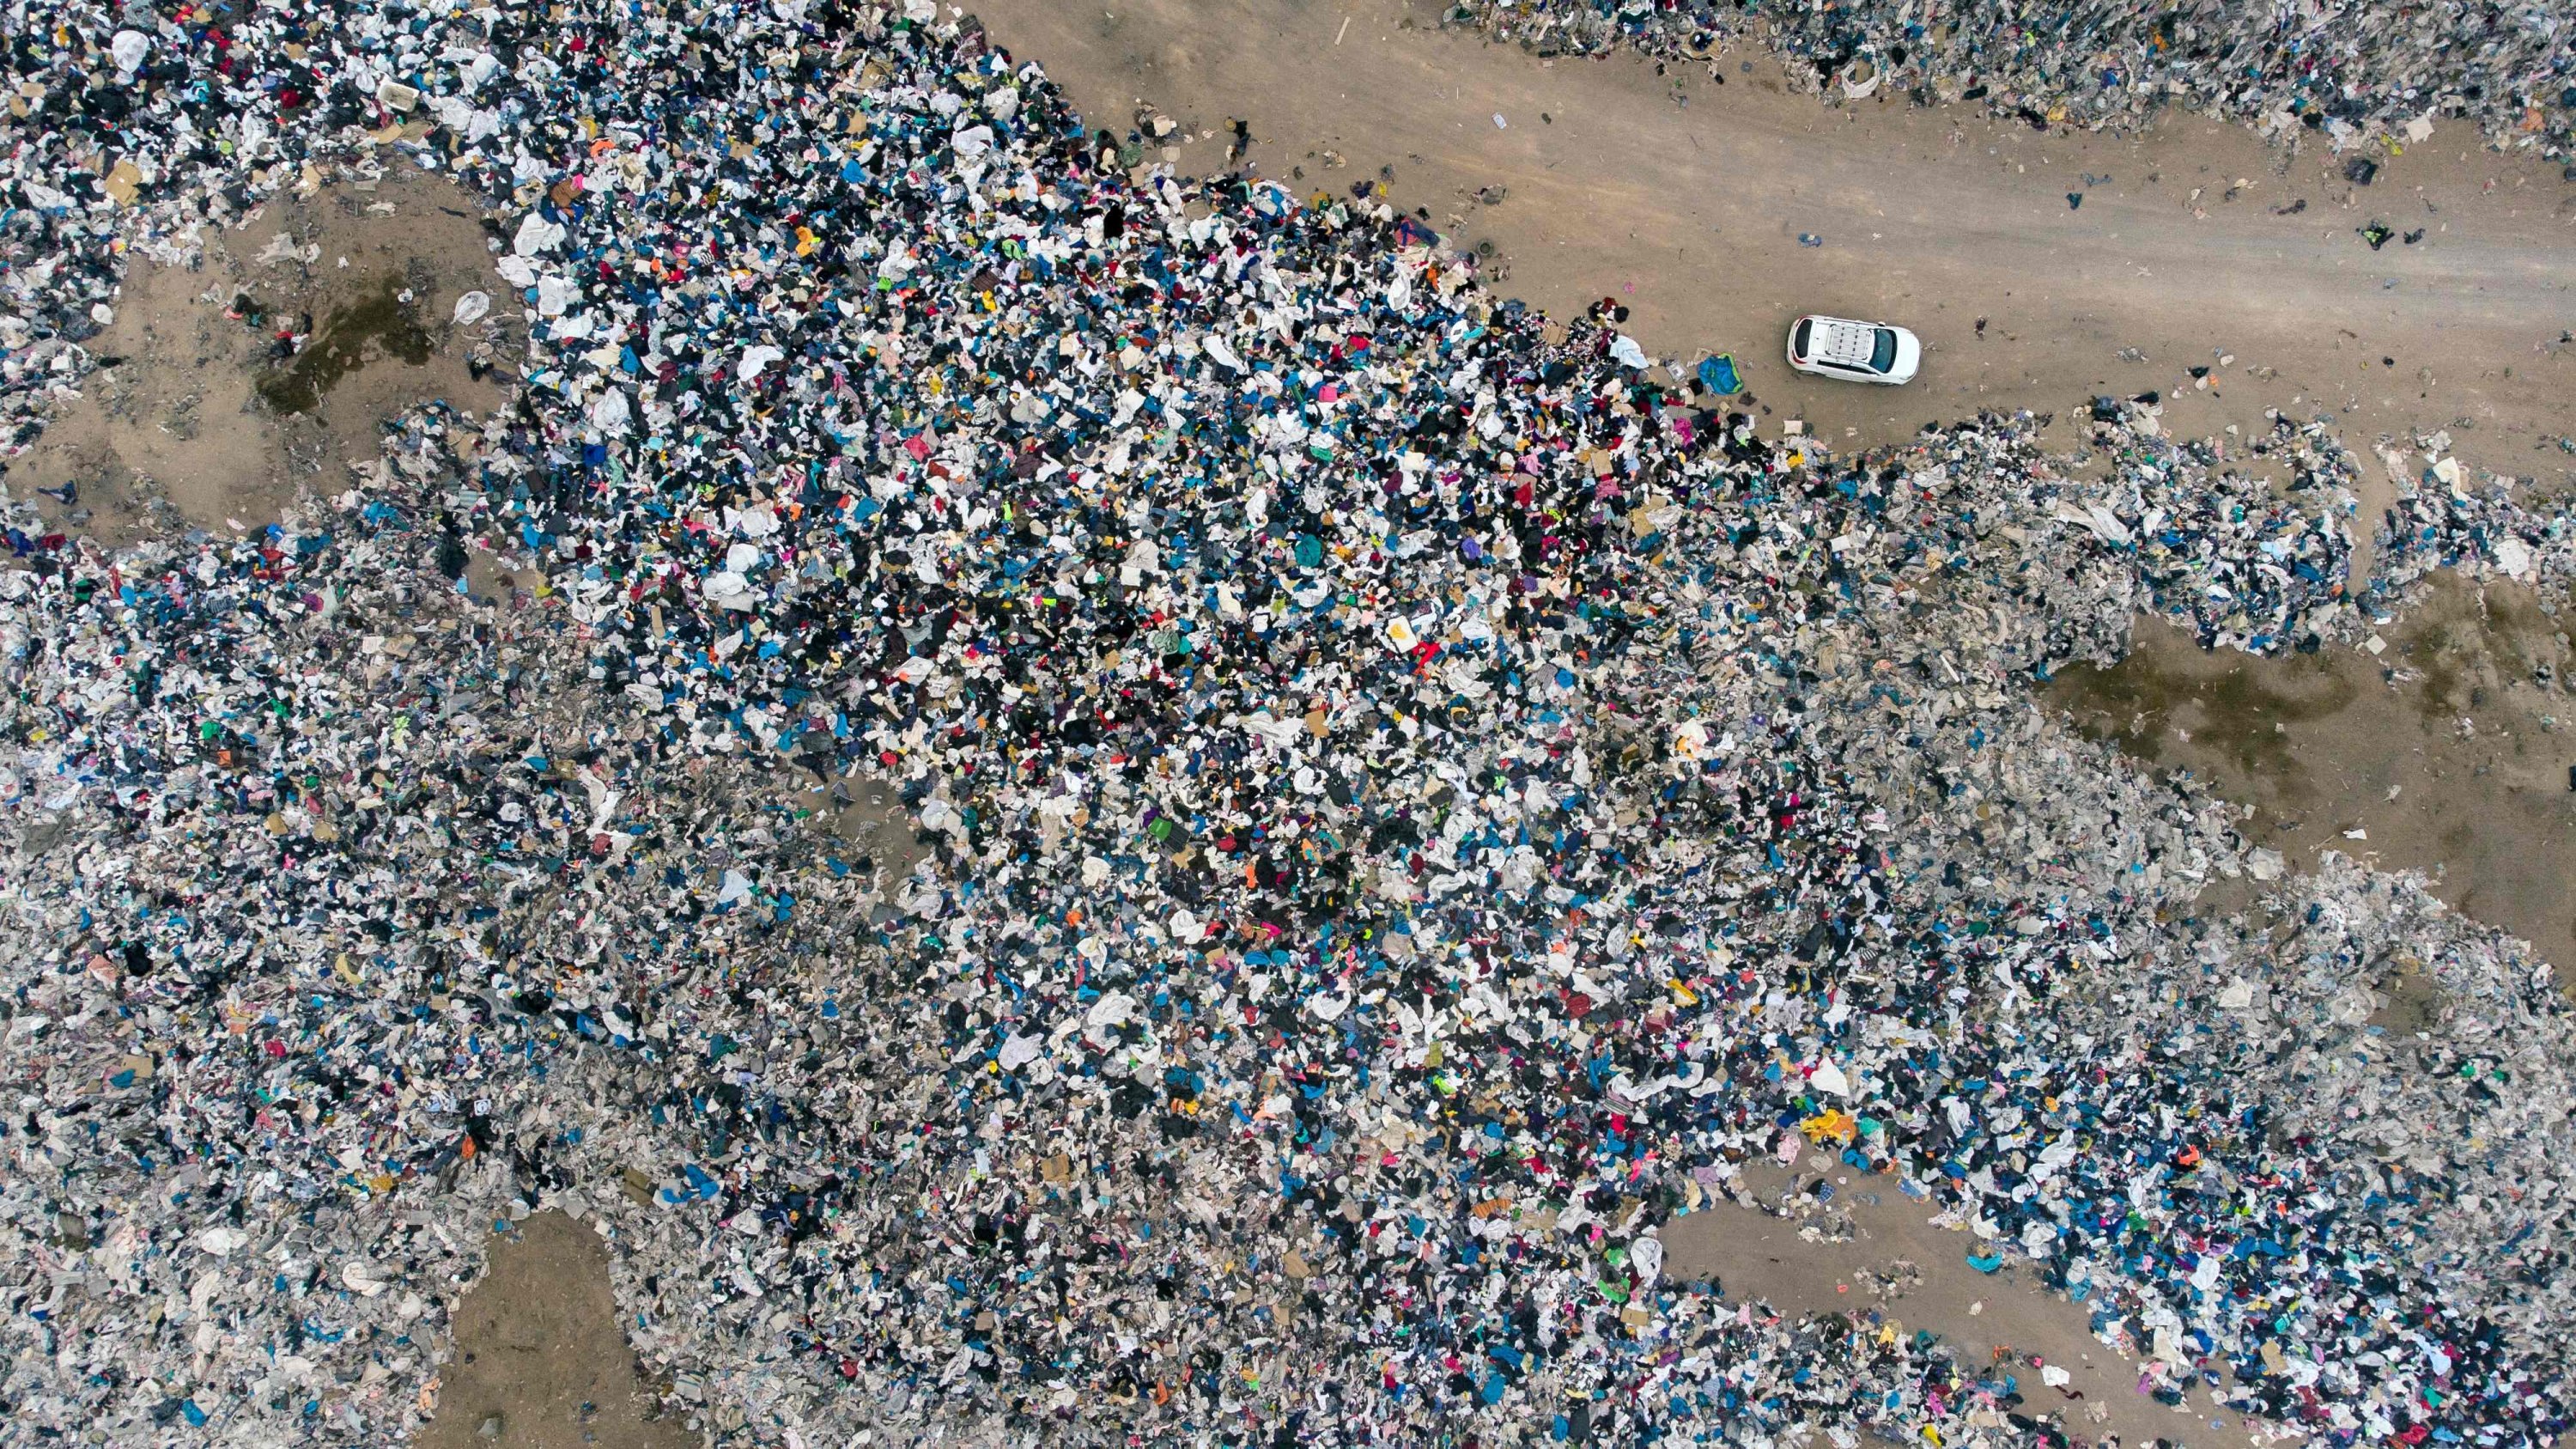 An aerial view of used clothes discarded in the Atacama desert, in Alto Hospicio, Iquique, Chile, Sept. 26, 2021. (AFP Photo)